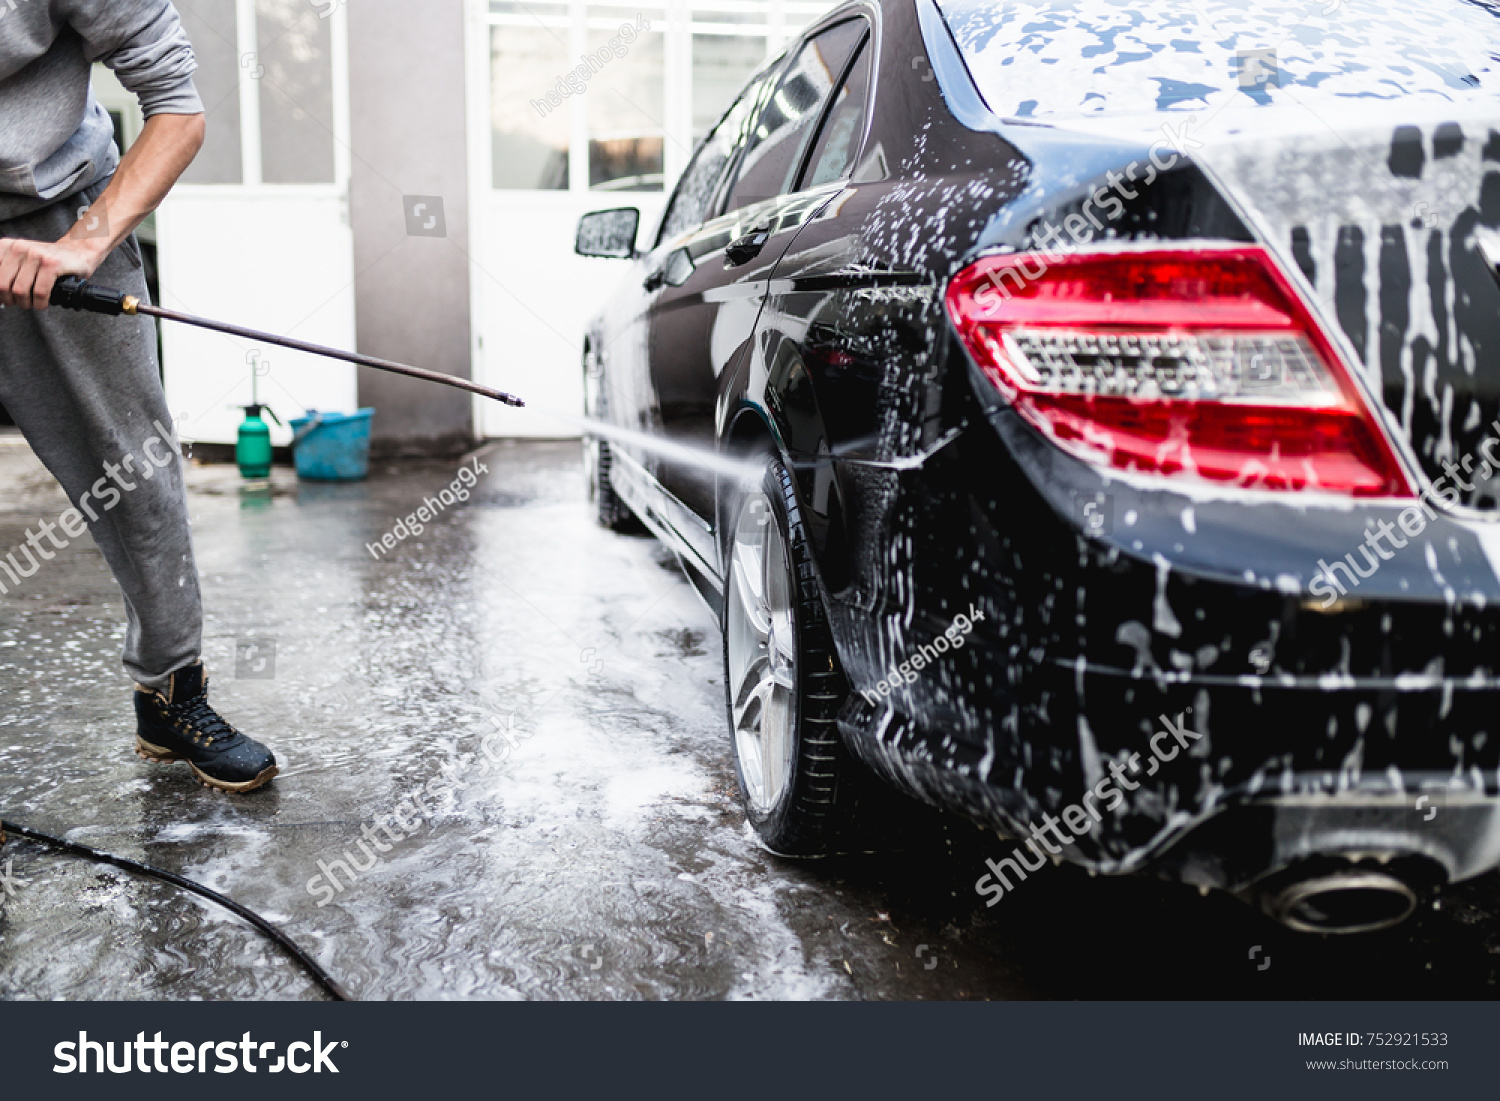 Car washing. Cleaning Car Using High Pressure Water.  #752921533